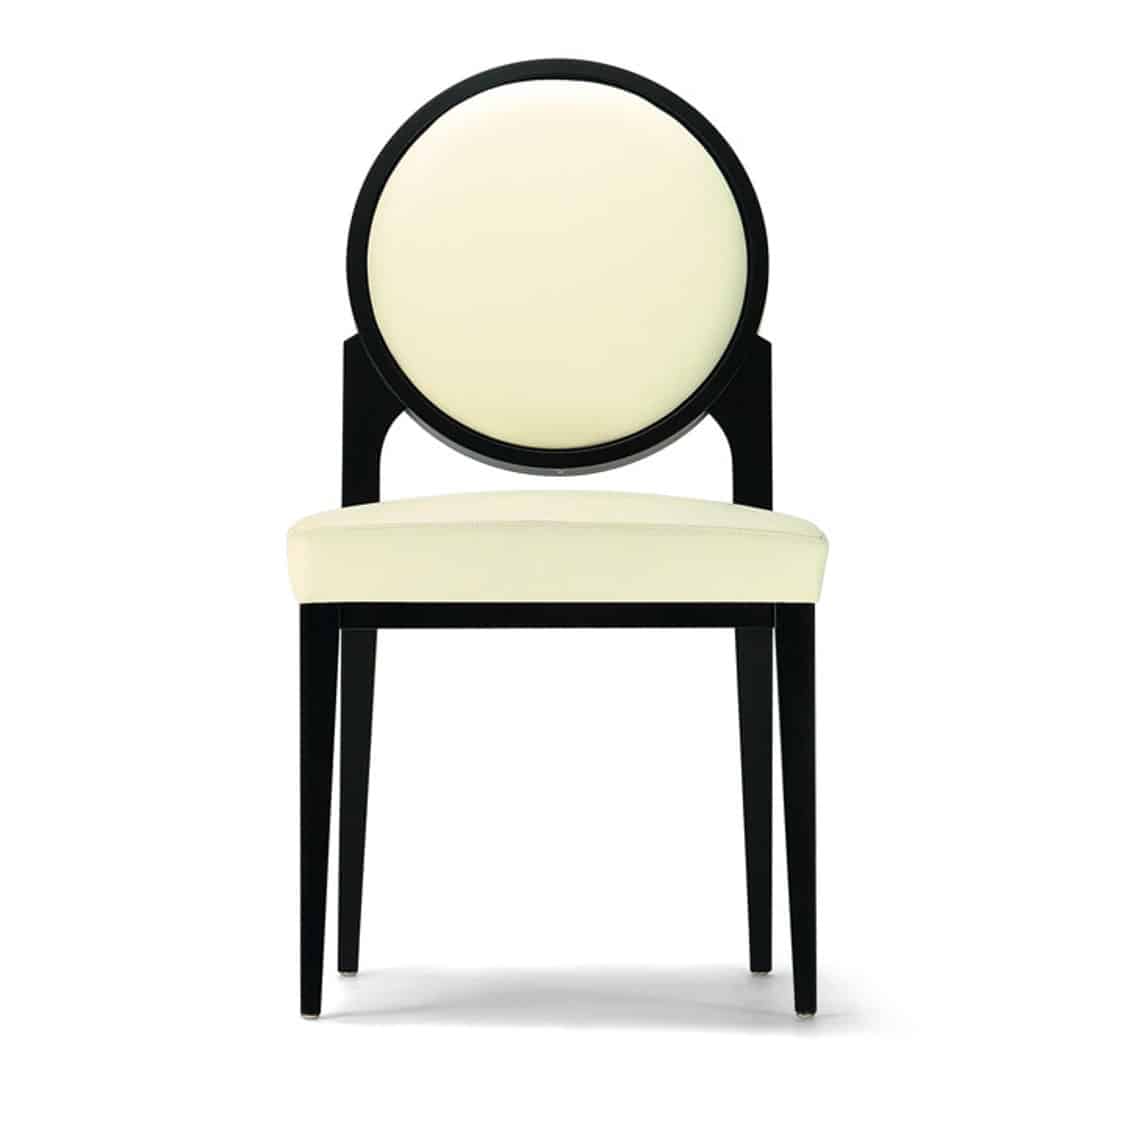 Dolce Vita side chair dining chair DeFrae Contrcat Furniture